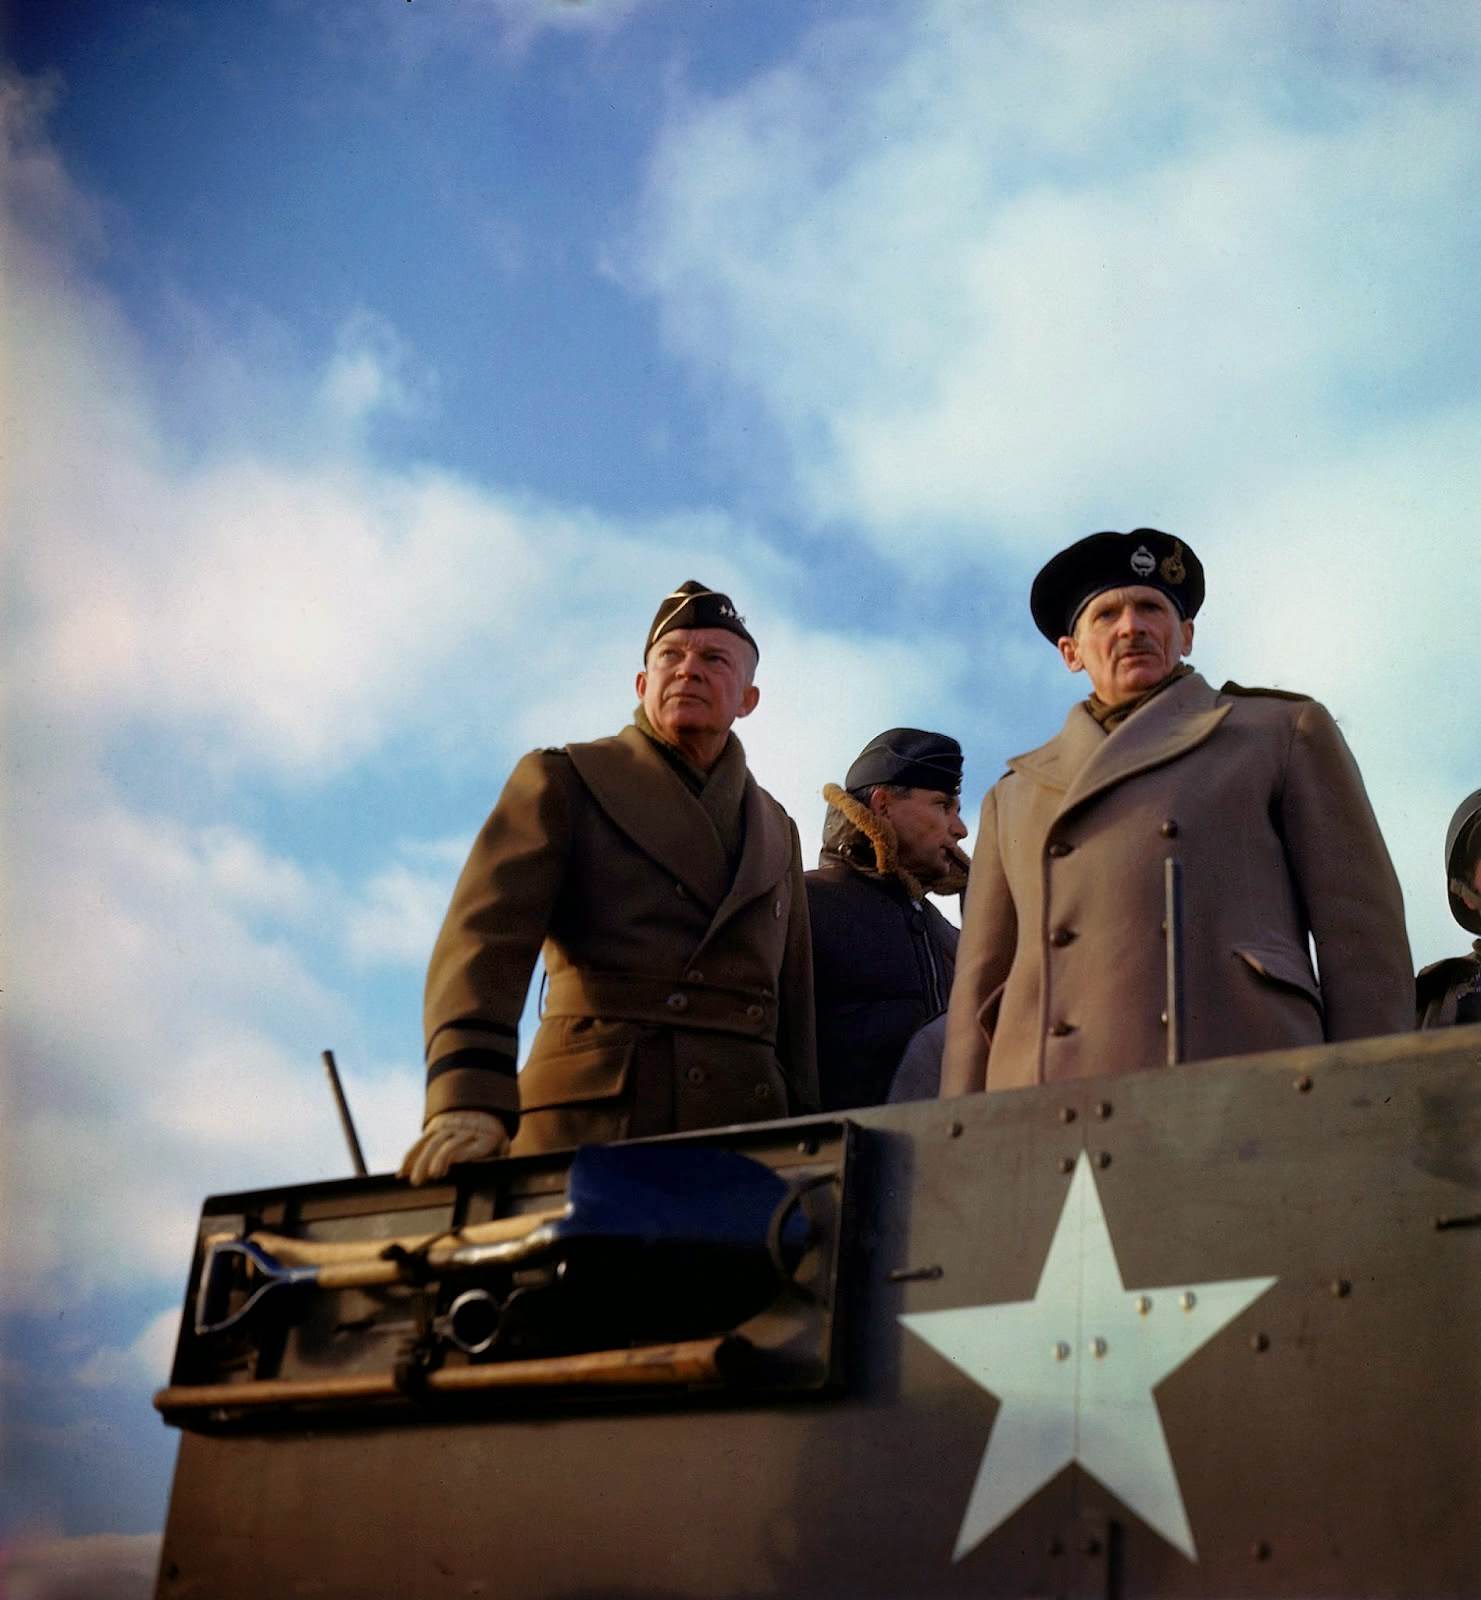 Supreme Allied Commander American General Dwight D. Eisenhower, his deputy, British Chief Air Marshal Arthur Tedder , and the principal commander of Allied ground forces in Europe, British General Bernard L. Montgomery, stand in a US armored vehicle as they review a tank exercise, Salisbury, England